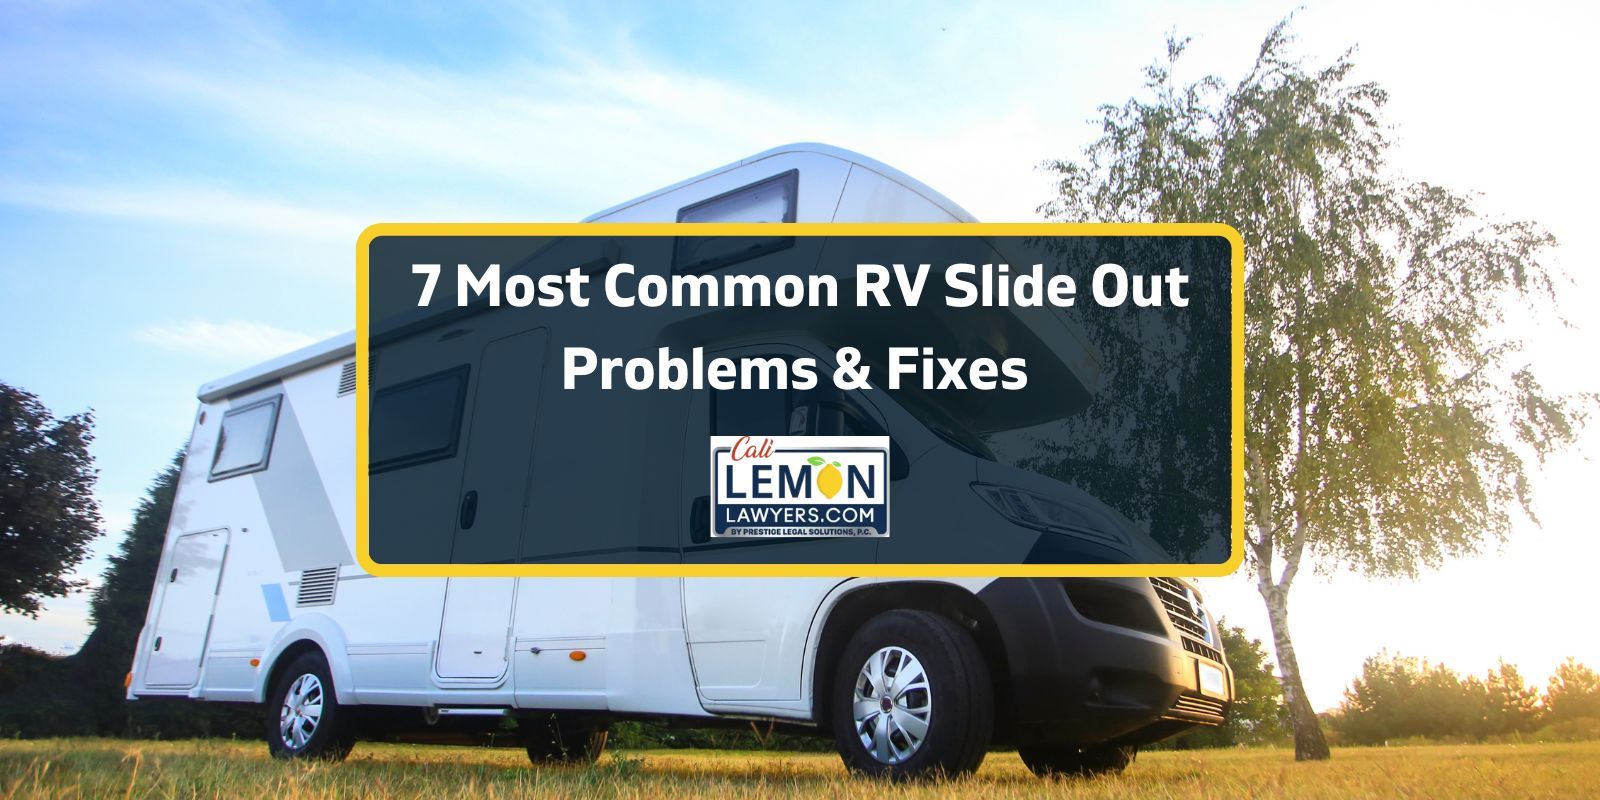 RV Slide Out Problems